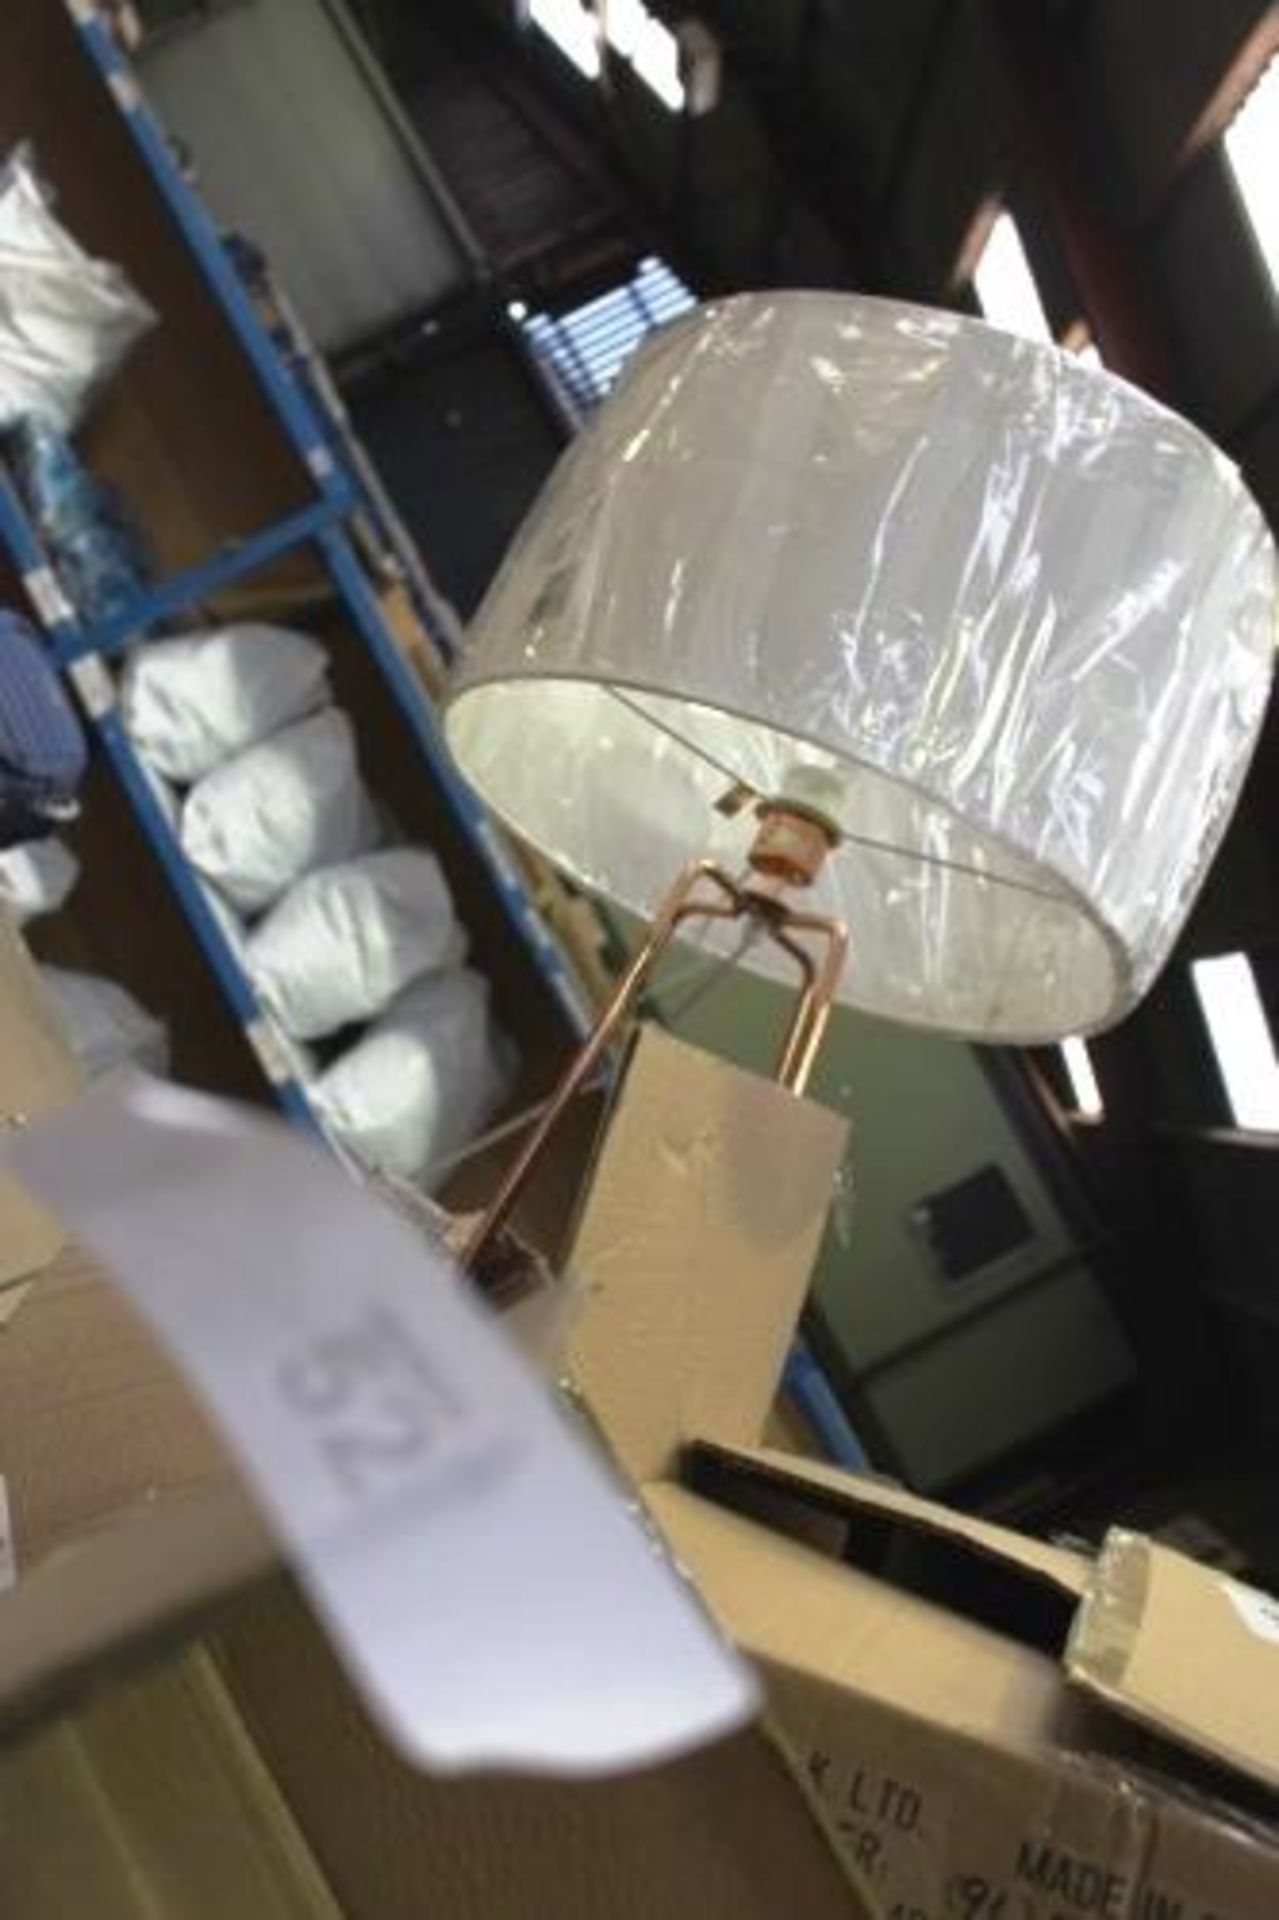 4 x floor lamps including chrome twist spiral and gold 4 legged lamps etc. - New (ES7) - Image 2 of 2